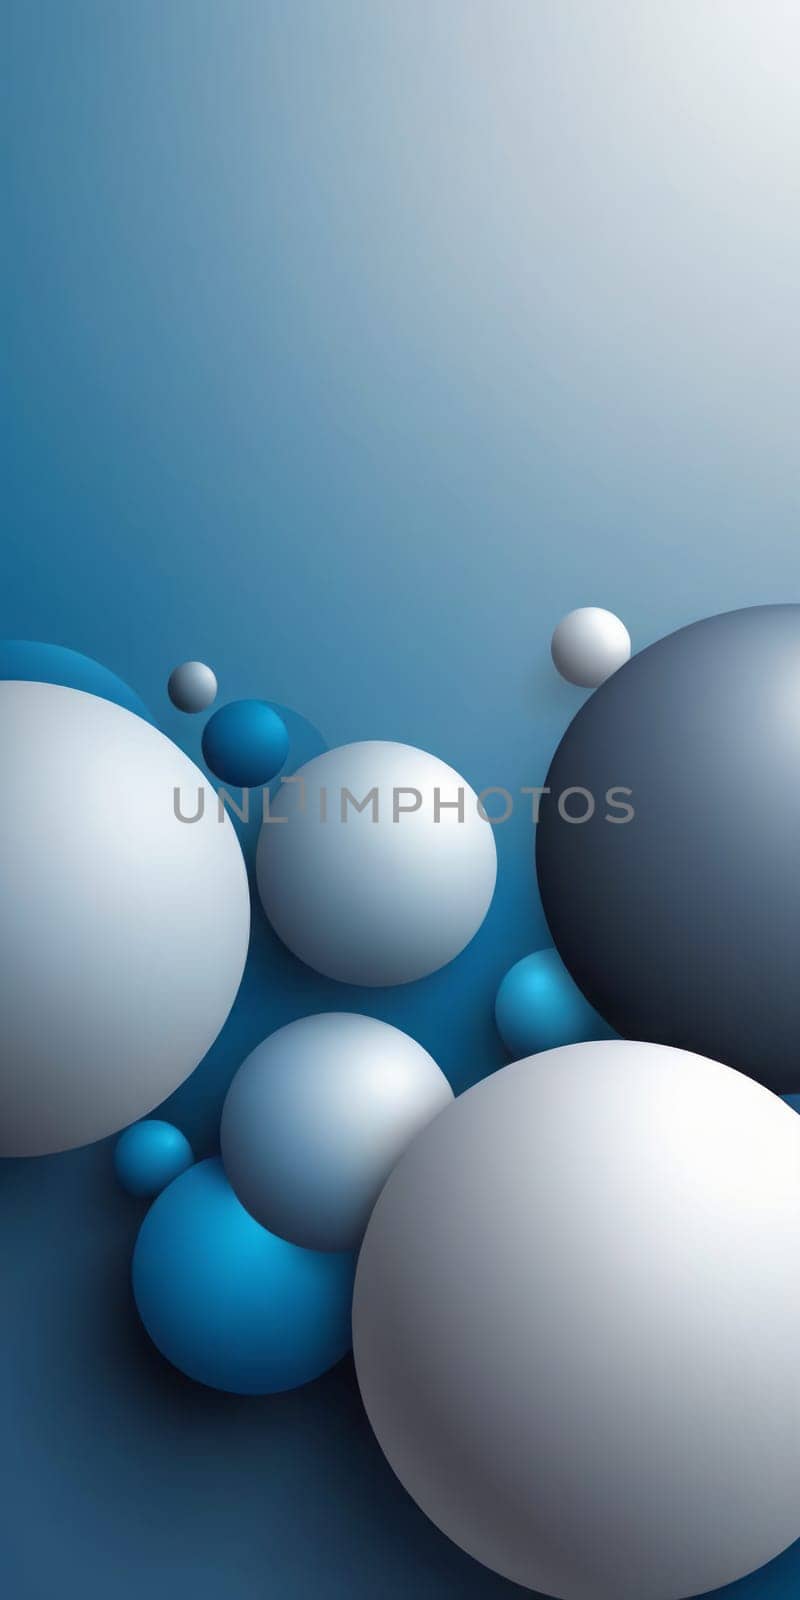 Spherical Shapes in Blue Gray by nkotlyar